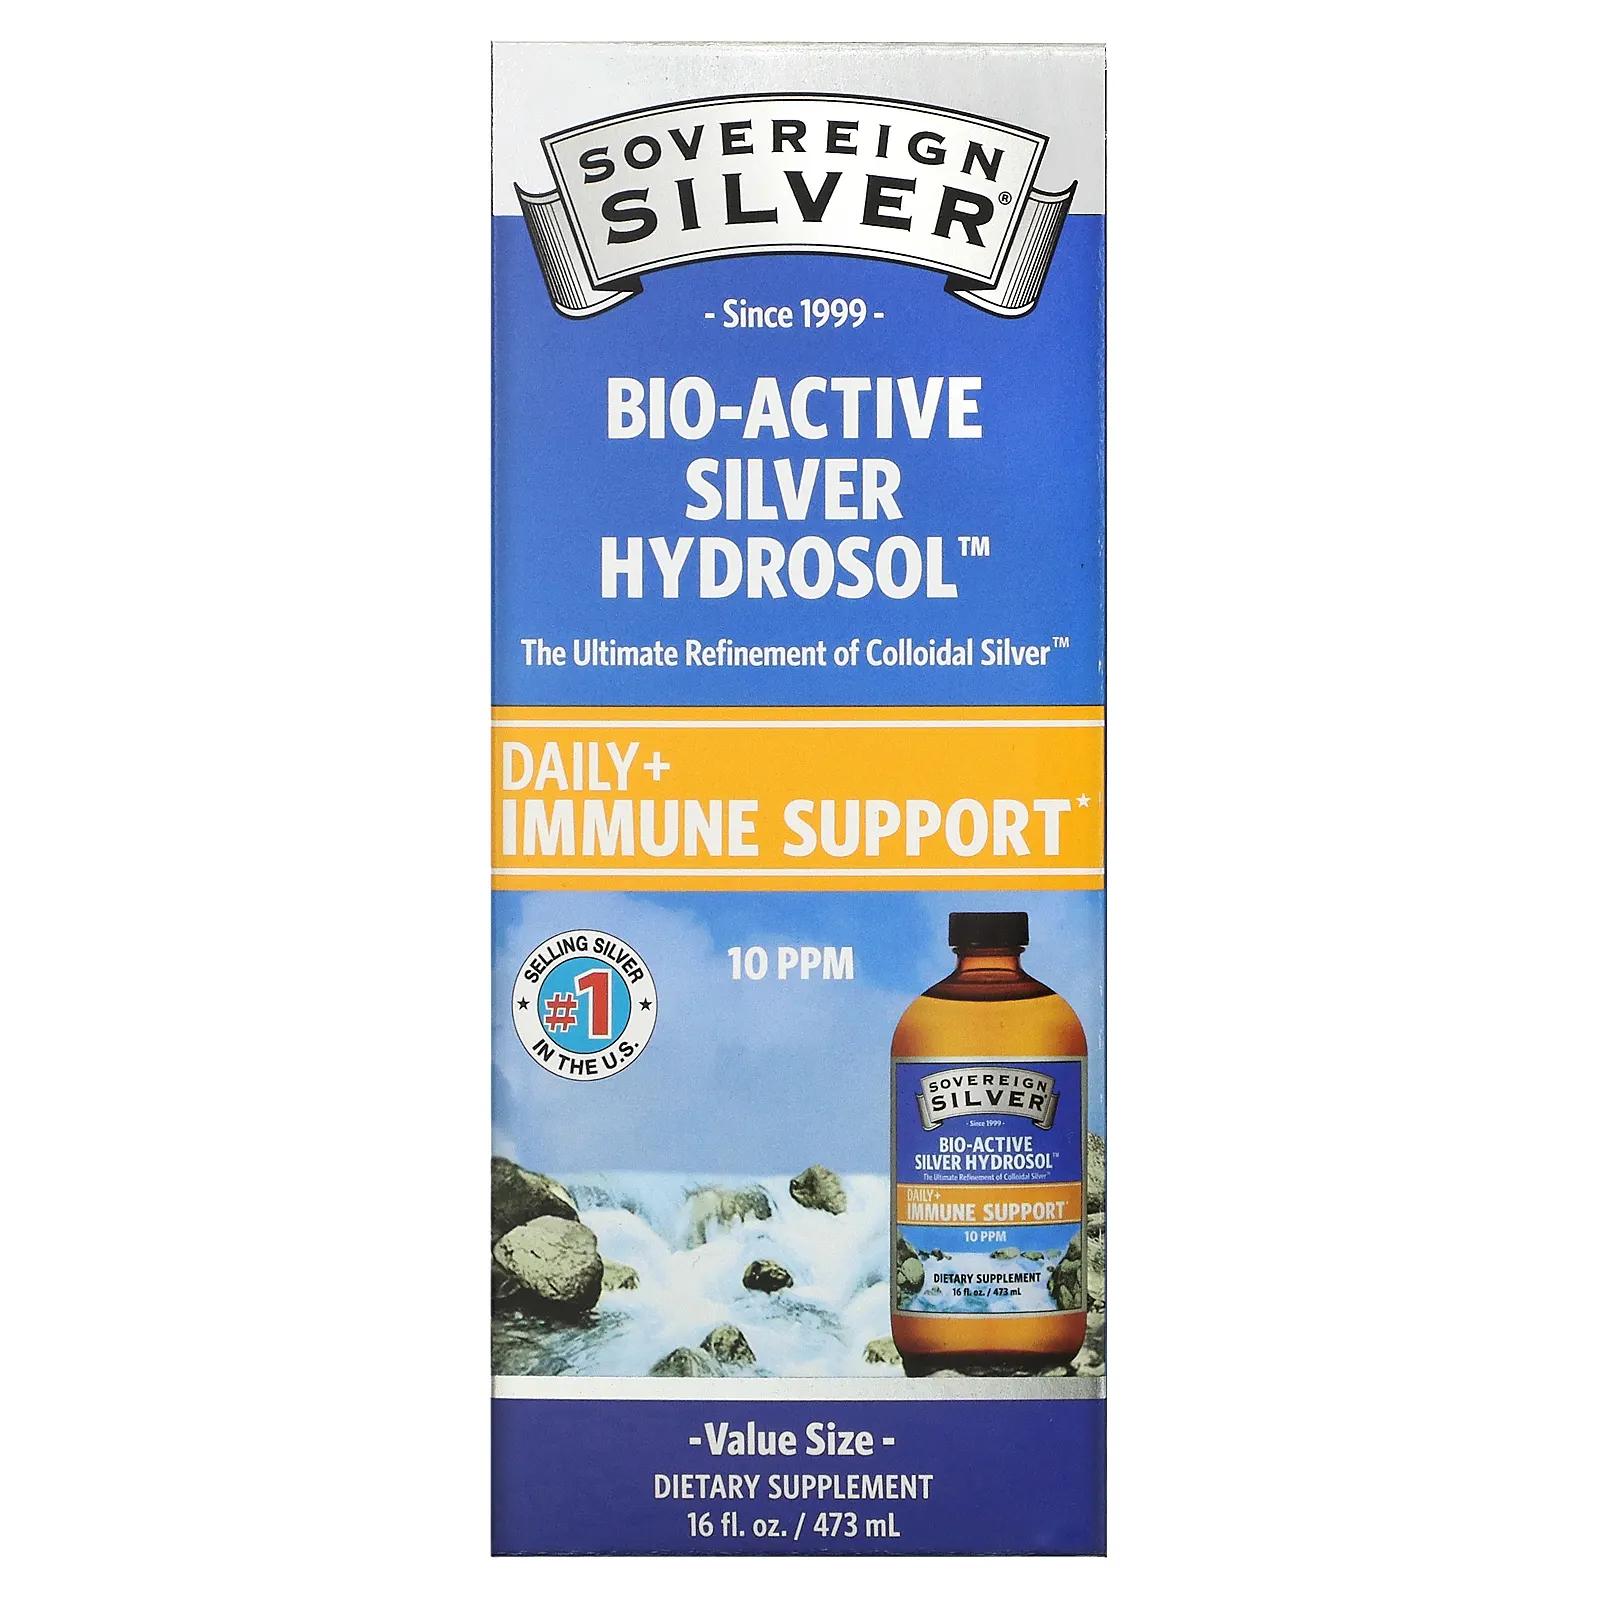 Sovereign Silver Bio-Active Silver Hydrosol 10 PPM 16 fl oz (473 ml) sovereign silver bio active silver hydrosol daily immune support trial